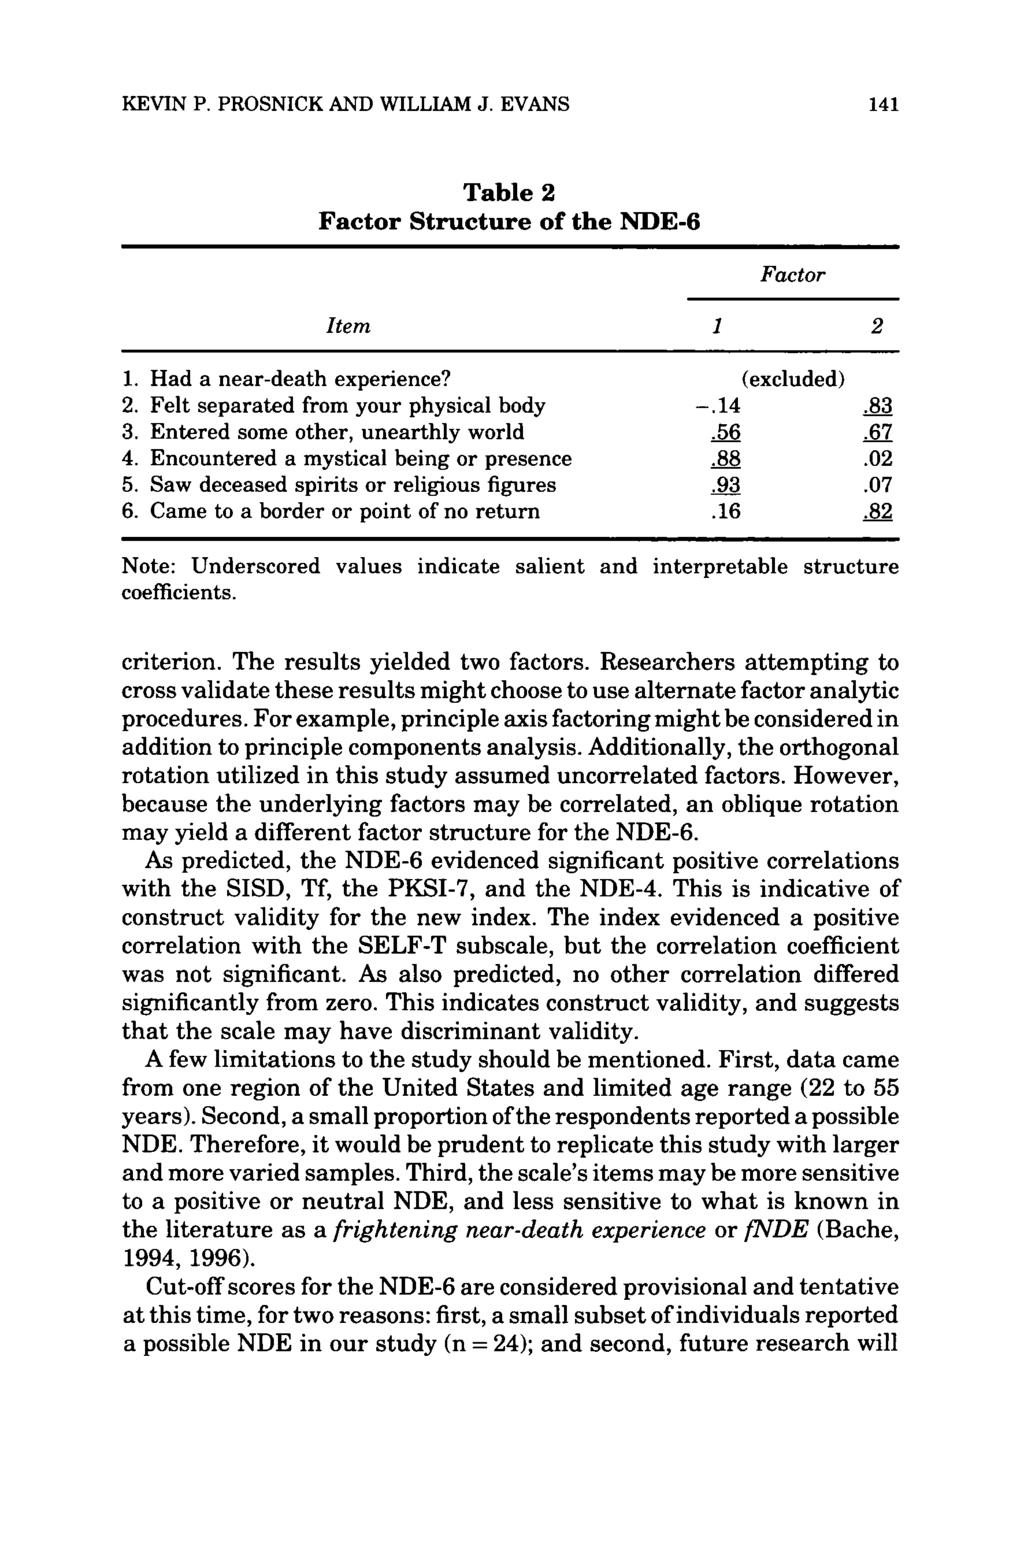 KEVIN P. PROSNICK AND WILLIAM J. EVANS 141 Table 2 Factor Structure of the NDE-6 Factor Item 1 2 1. Had a near-death experience? (excluded) 2. Felt separated from your physical body -. 14.83 3.